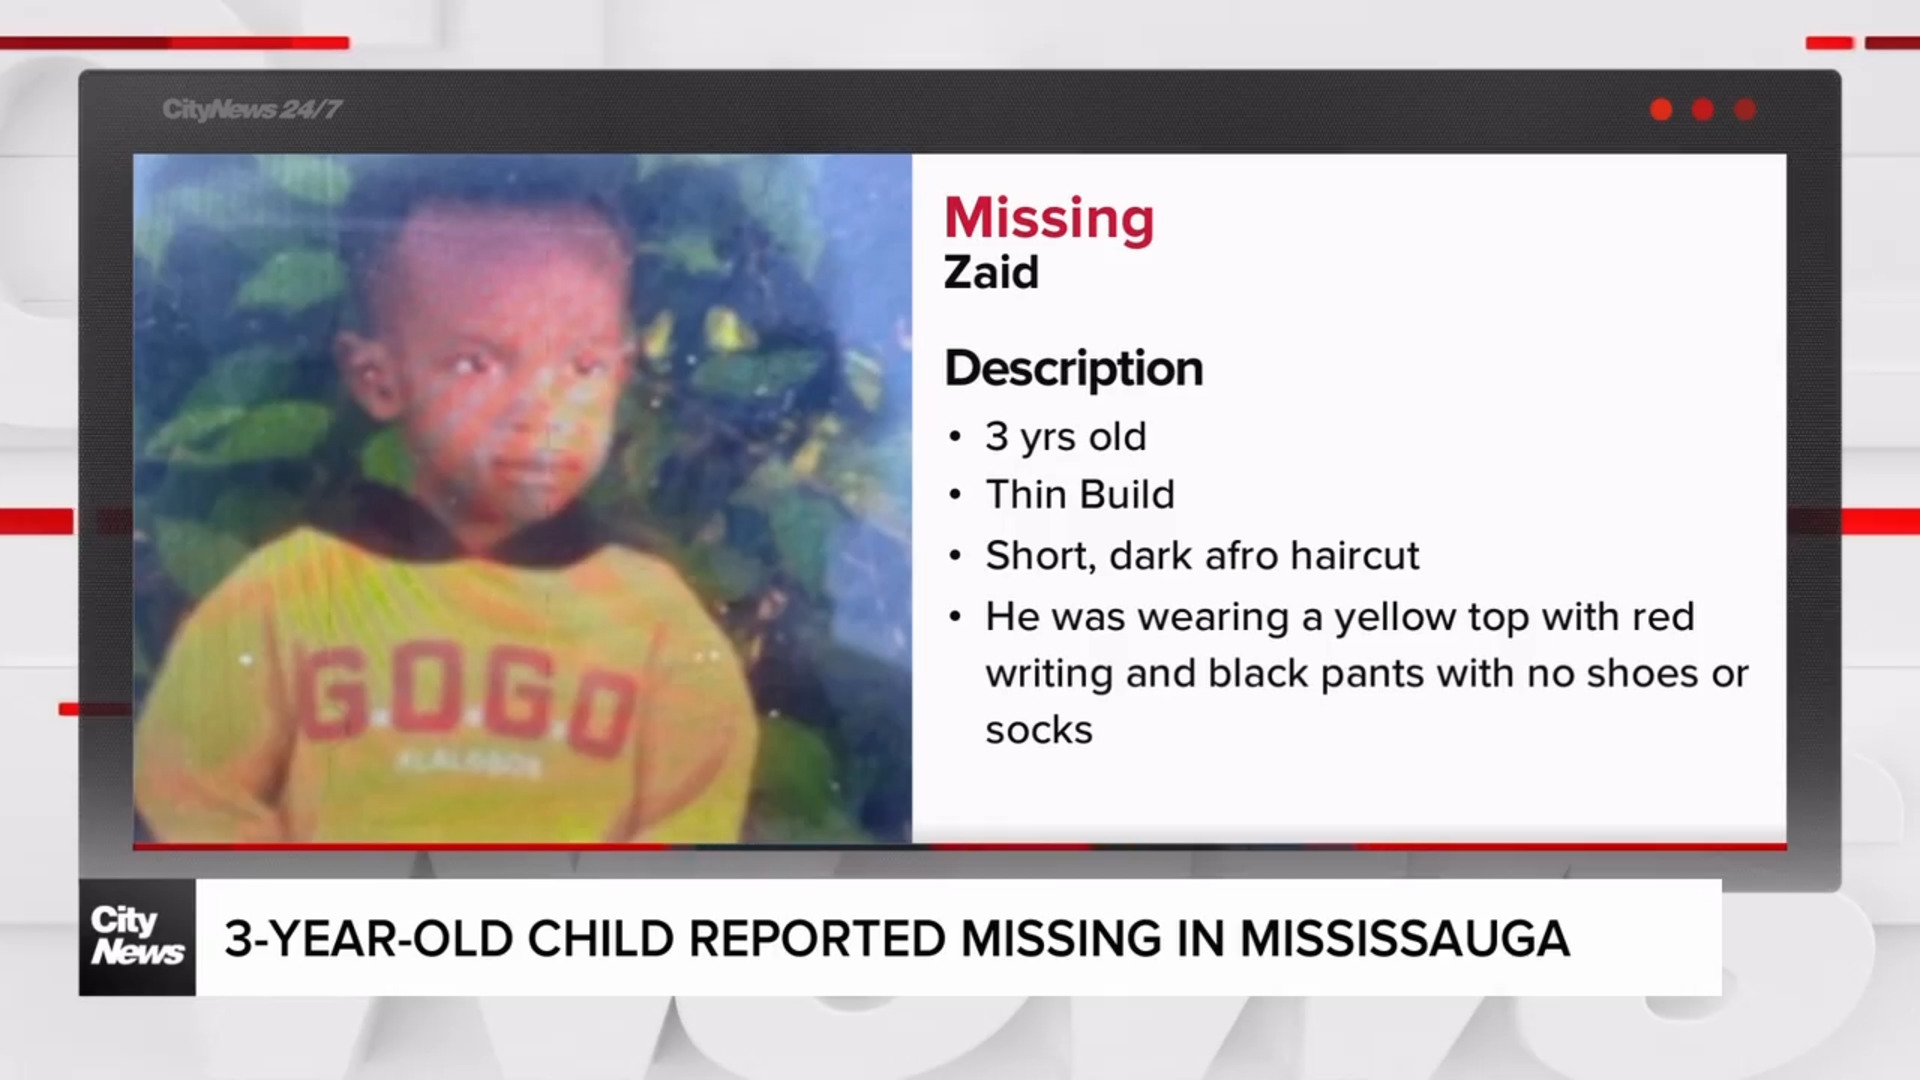 Missing 3-year-old boy in Mississauga prompts community to offer help